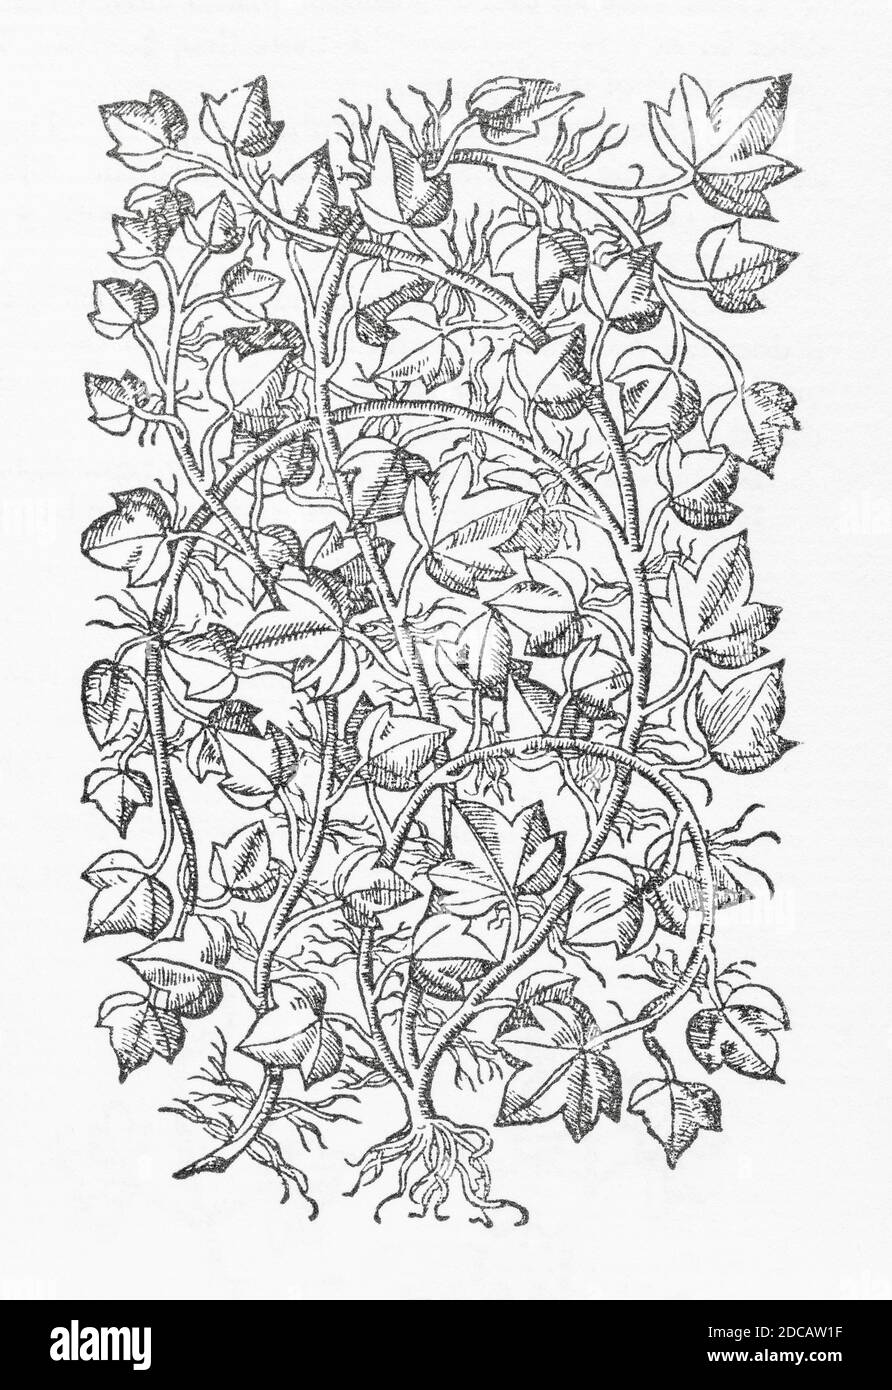 Ivy / Hedera helix plant woodcut from Gerarde's Herball, History of Plants. He refers to it as 'Climing or berried Ivie' / Hedera corymbosa. P708 Stock Photo